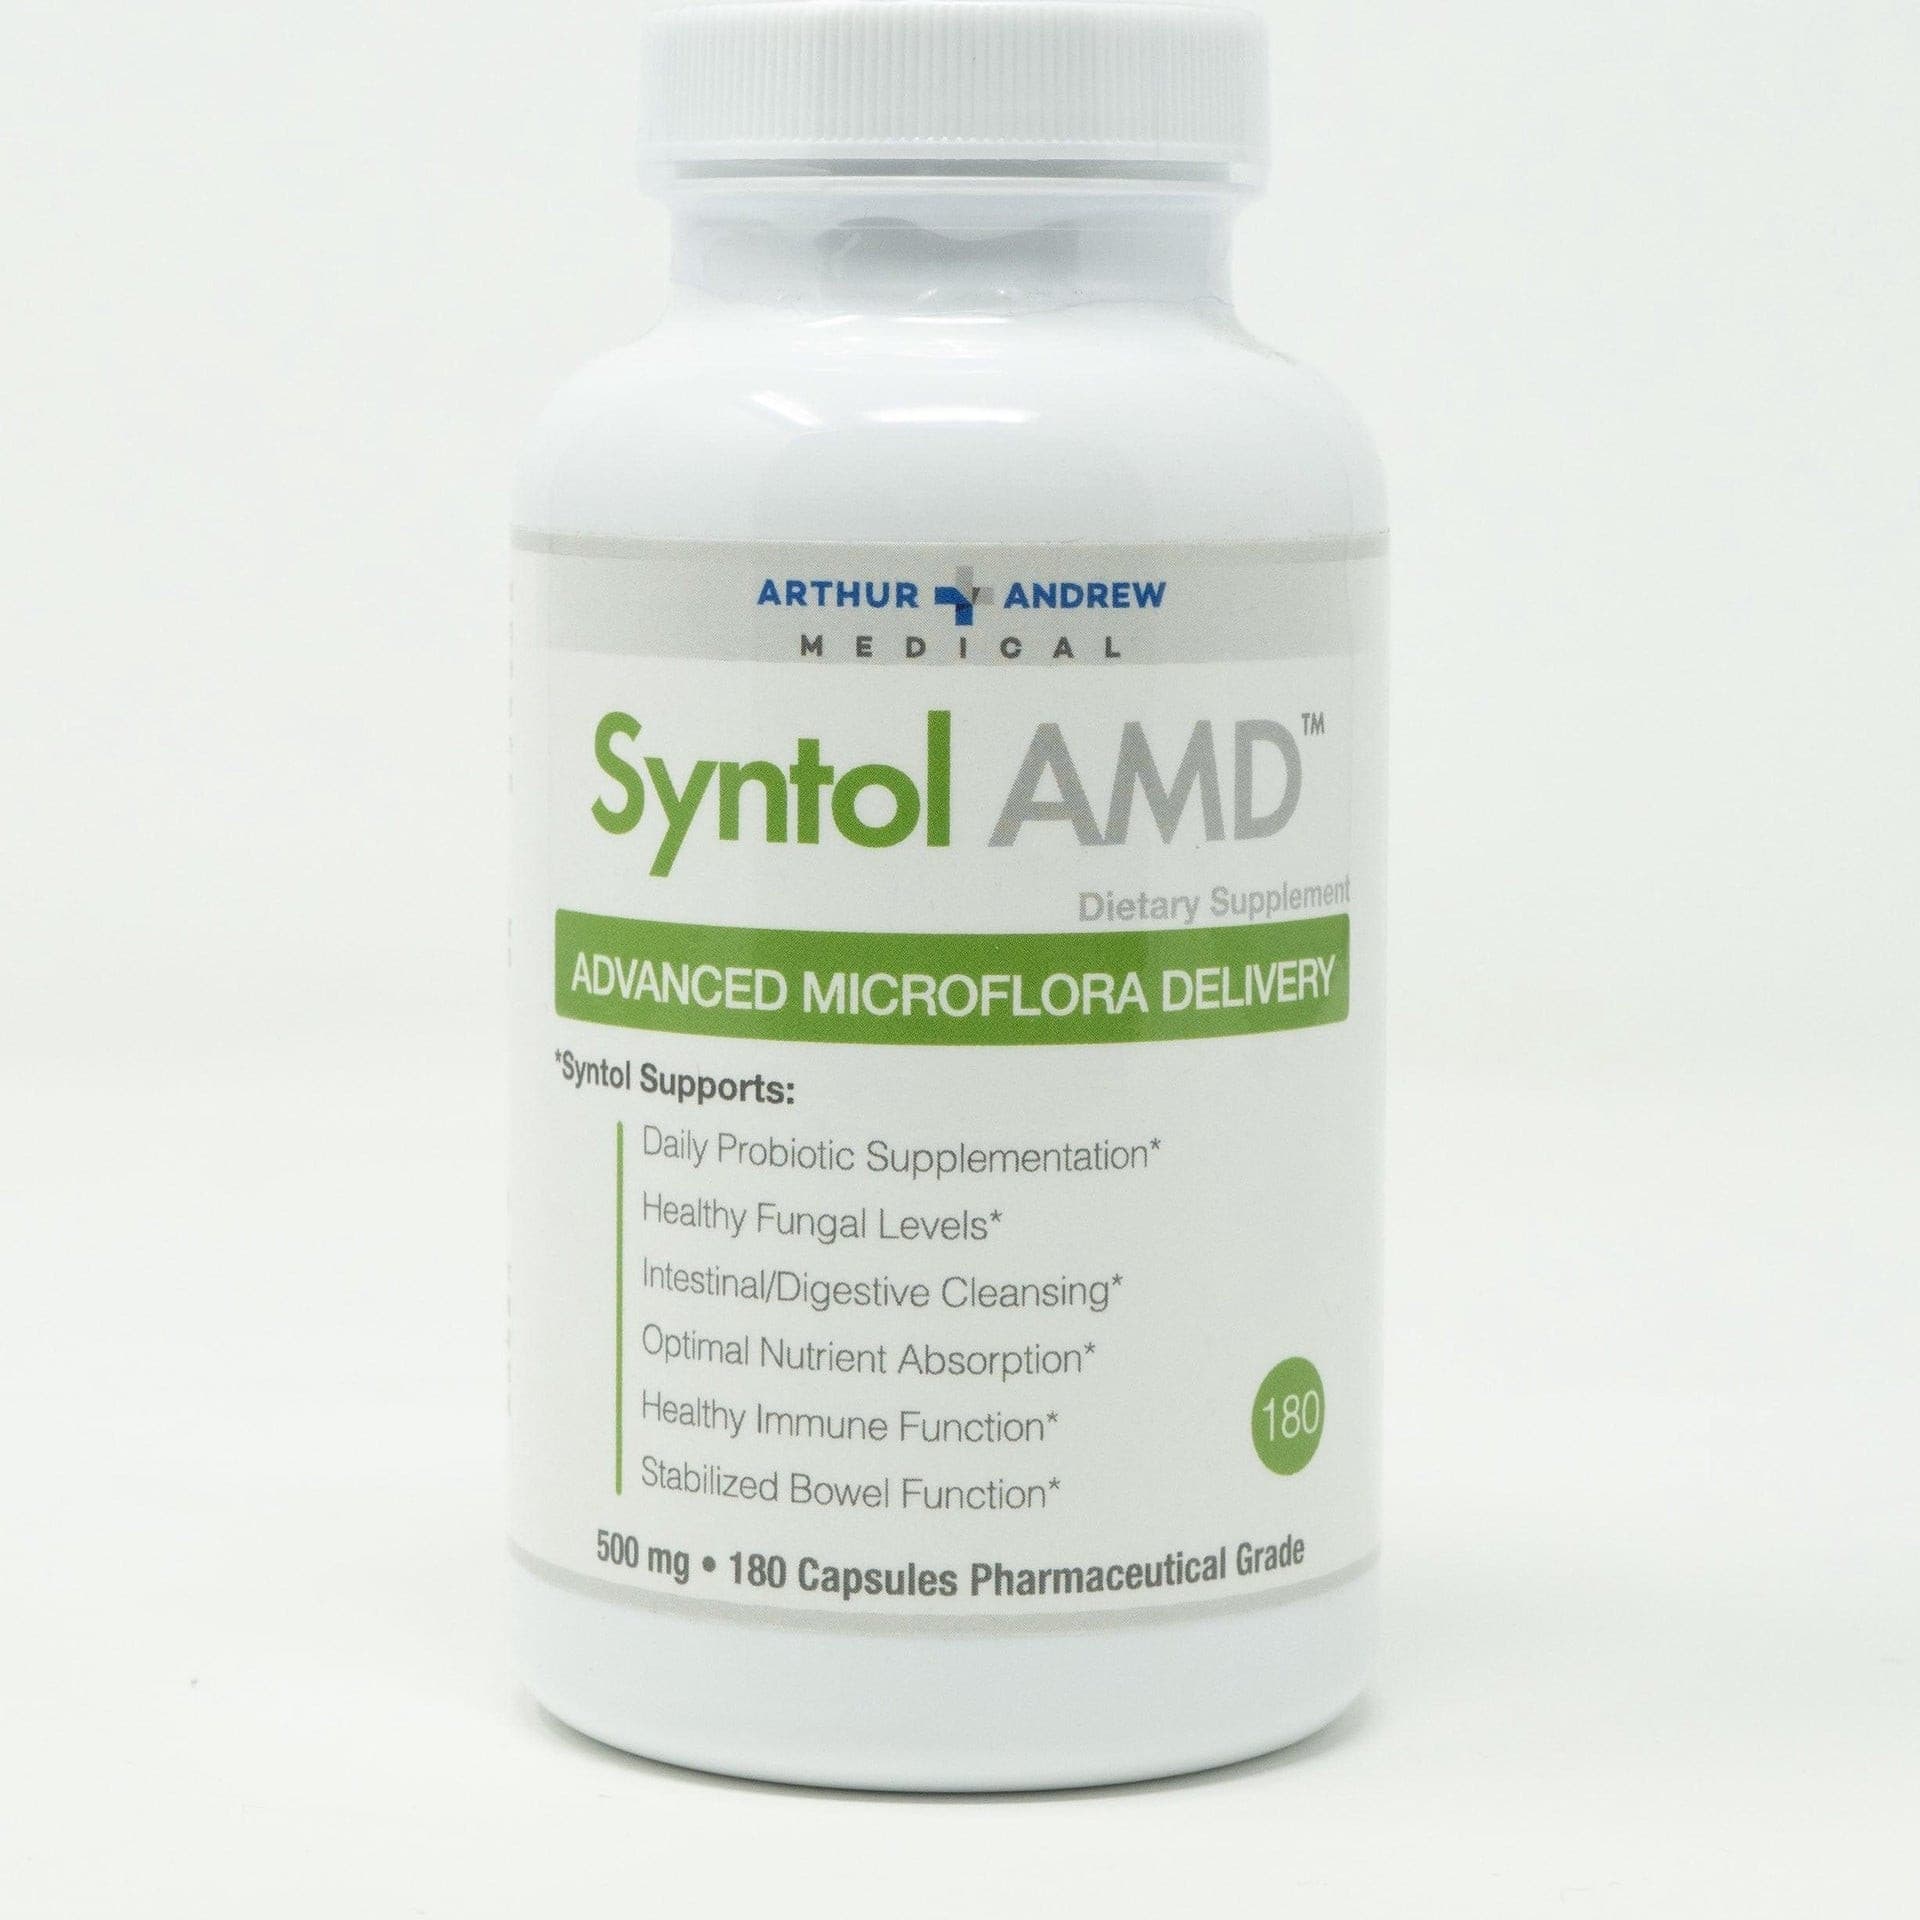 Syntol AMD 180 Capsules